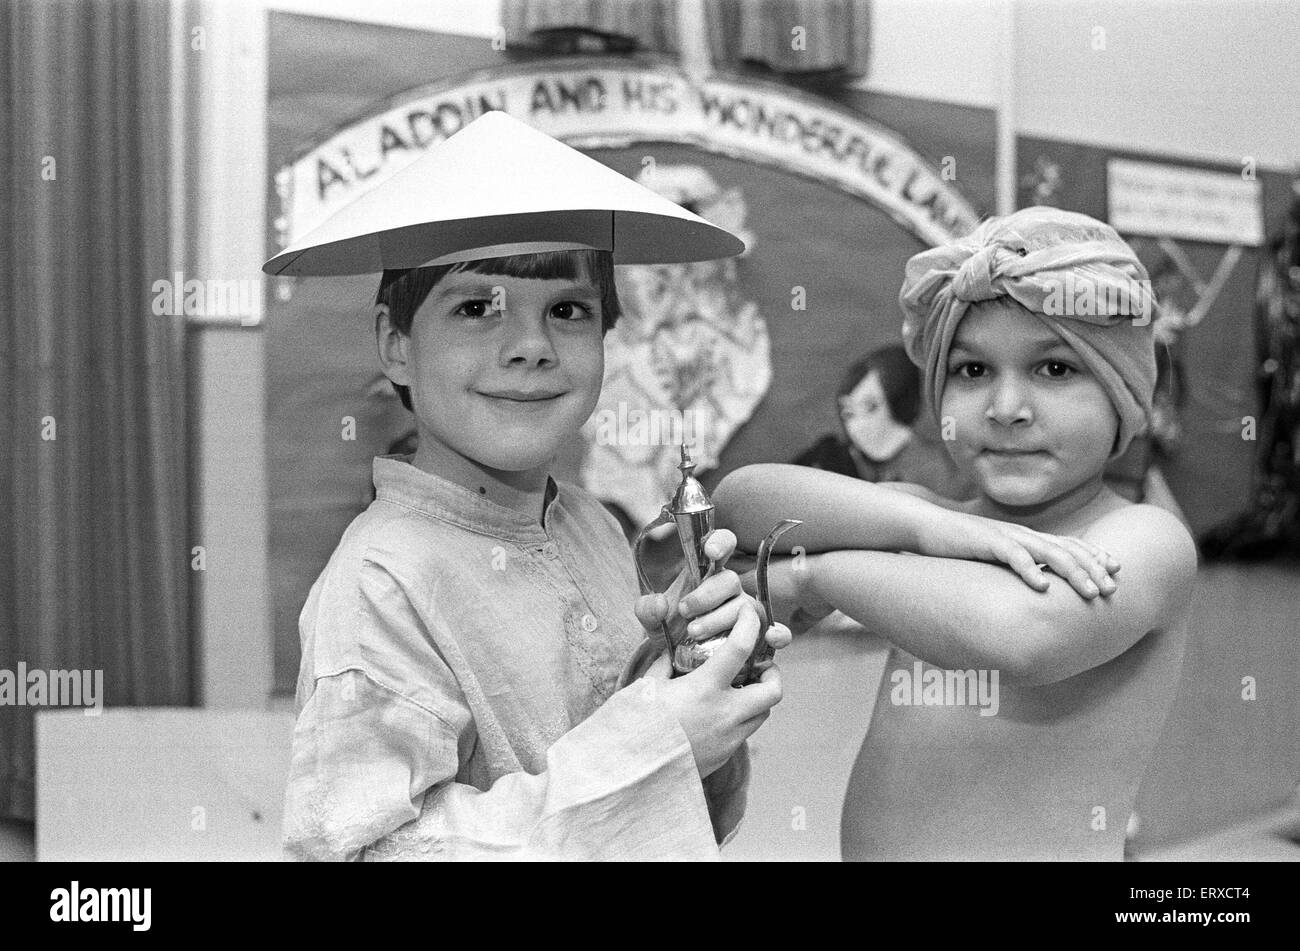 Berry Brow School Pantomime Aladdin, pictures of Aladdin and Genie. 14th December 1985. Stock Photo